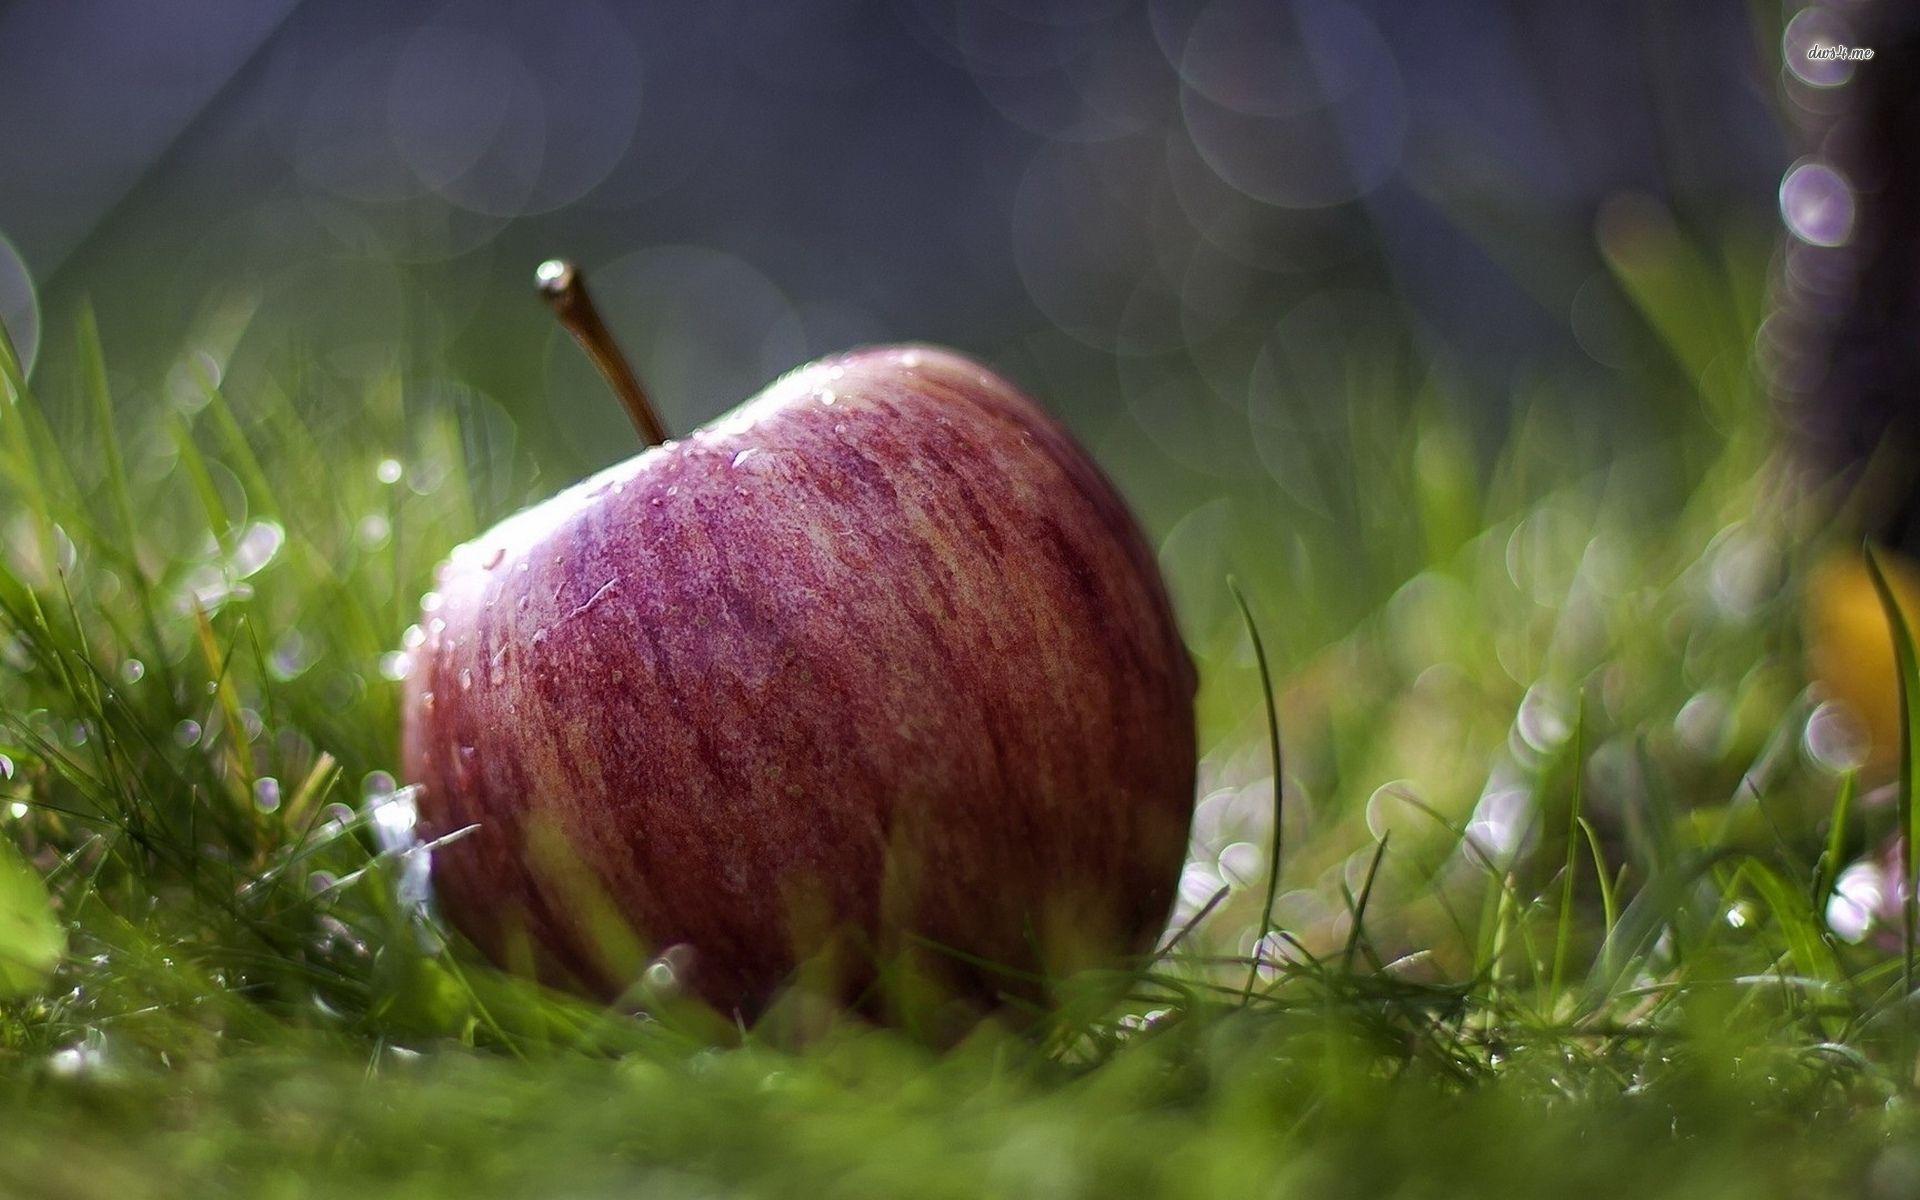 19119 Apple In The Wet Grass